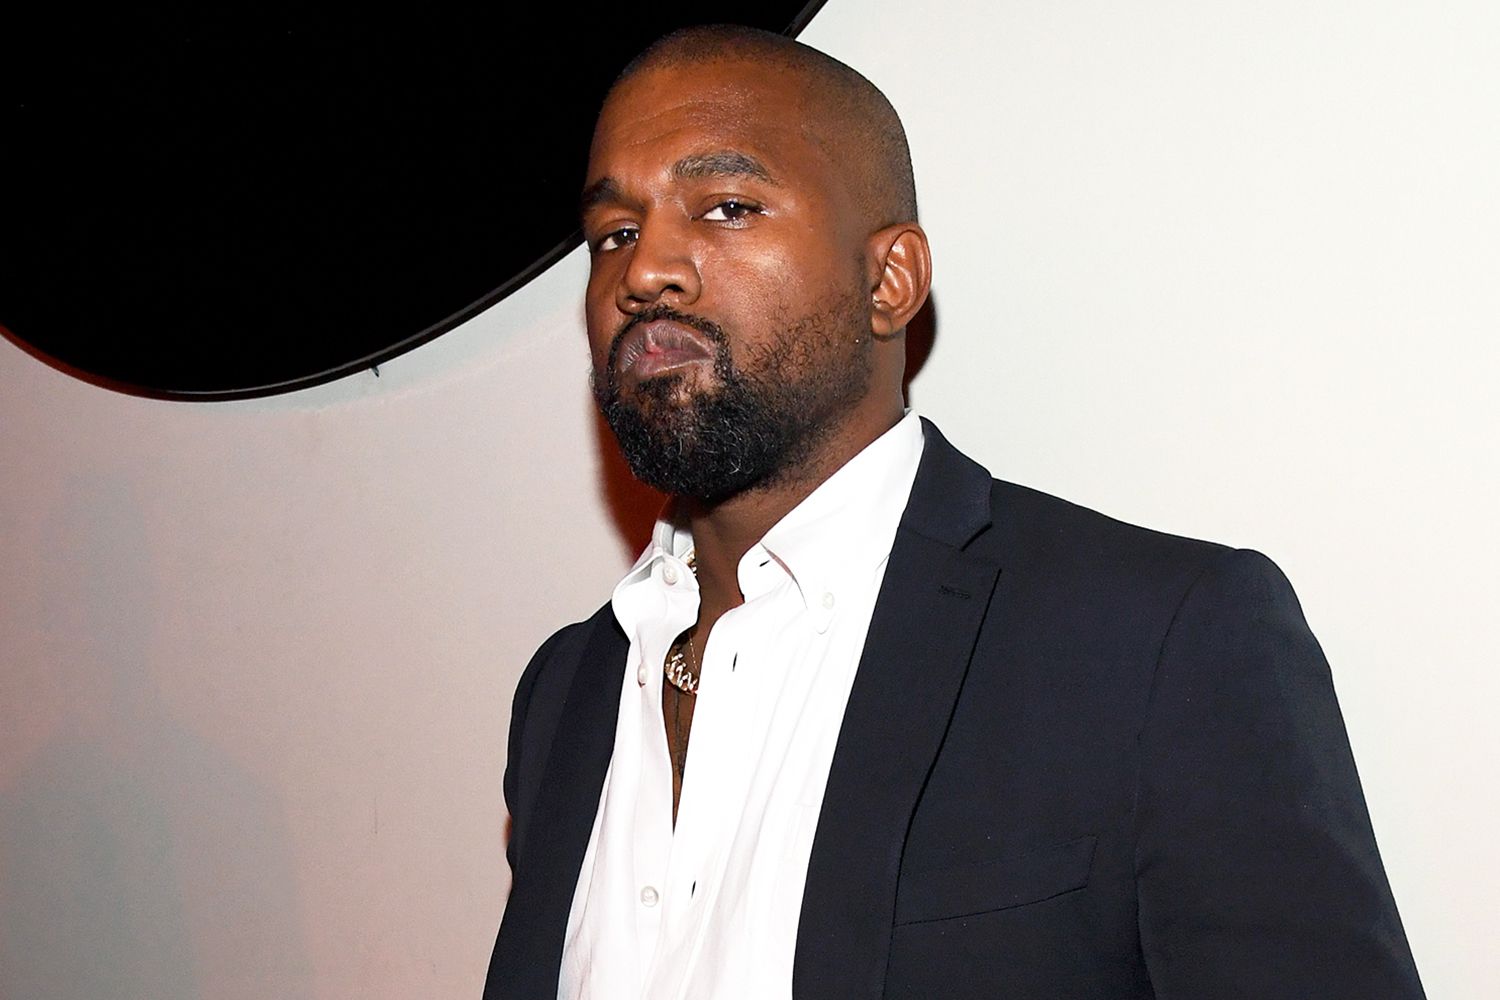 Kanye West Abruptly Ends Pedicure, Tells Nail Tech ‘It’s My Toes’